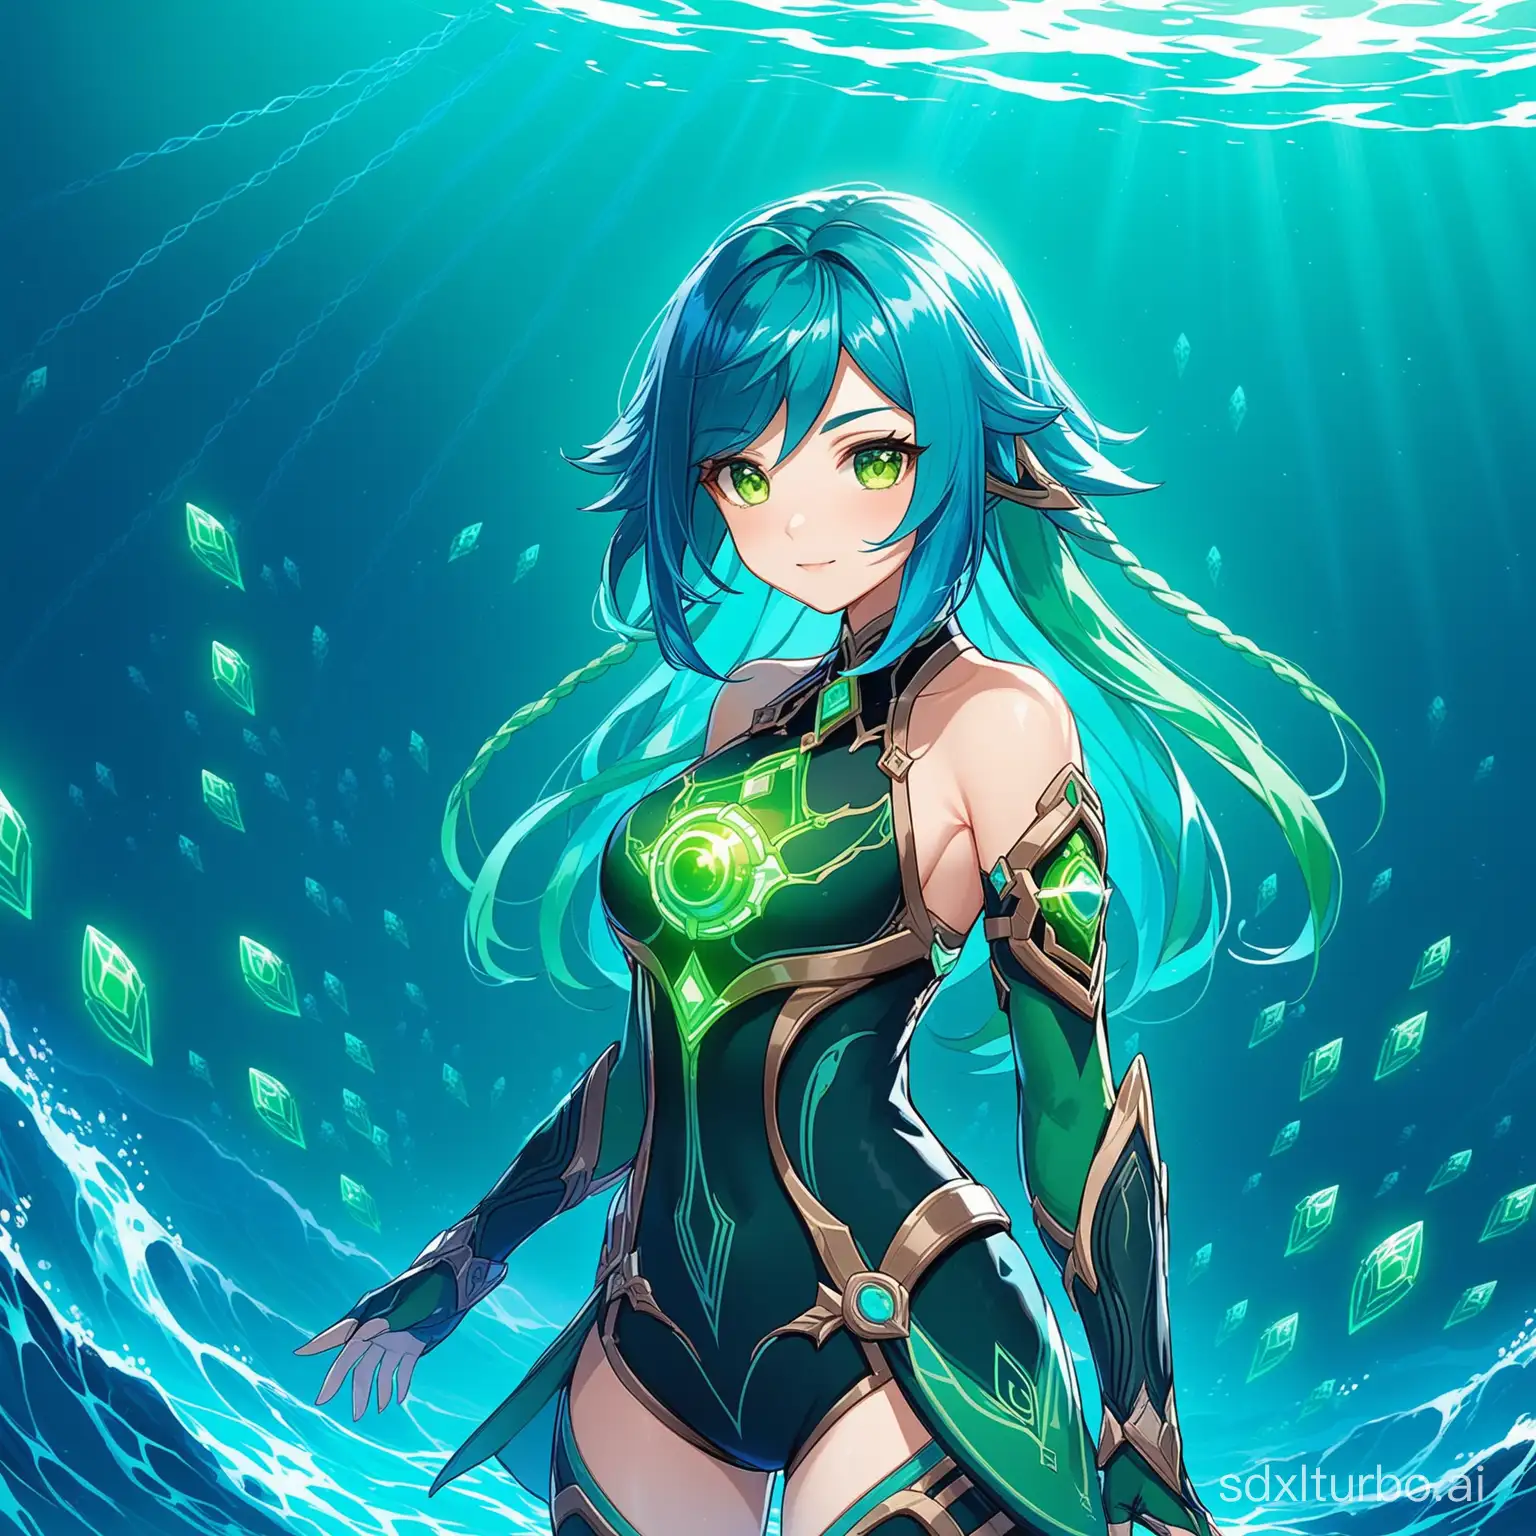 Cyber-Girl-with-Blue-Hair-in-Deep-Sea-Environment-Inspired-by-Genshin-Impact